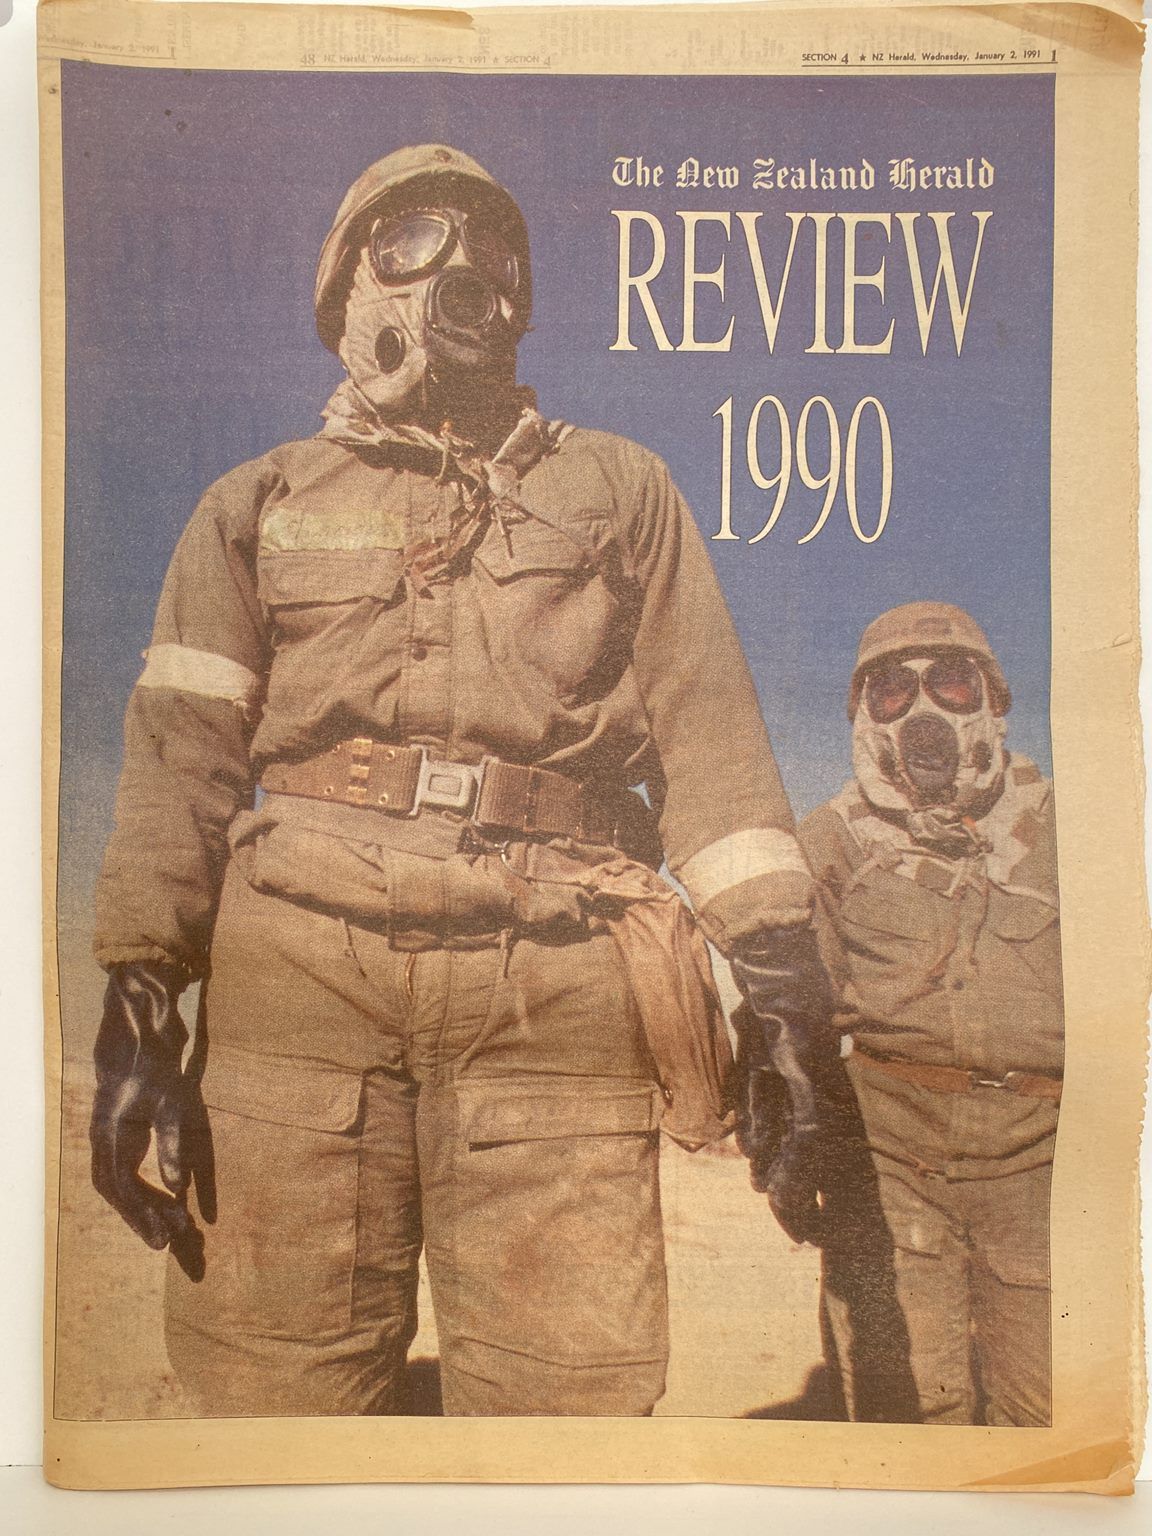 OLD NEWSPAPER: The New Zealand Herald, 2 January 1991 - Year Review of 1990